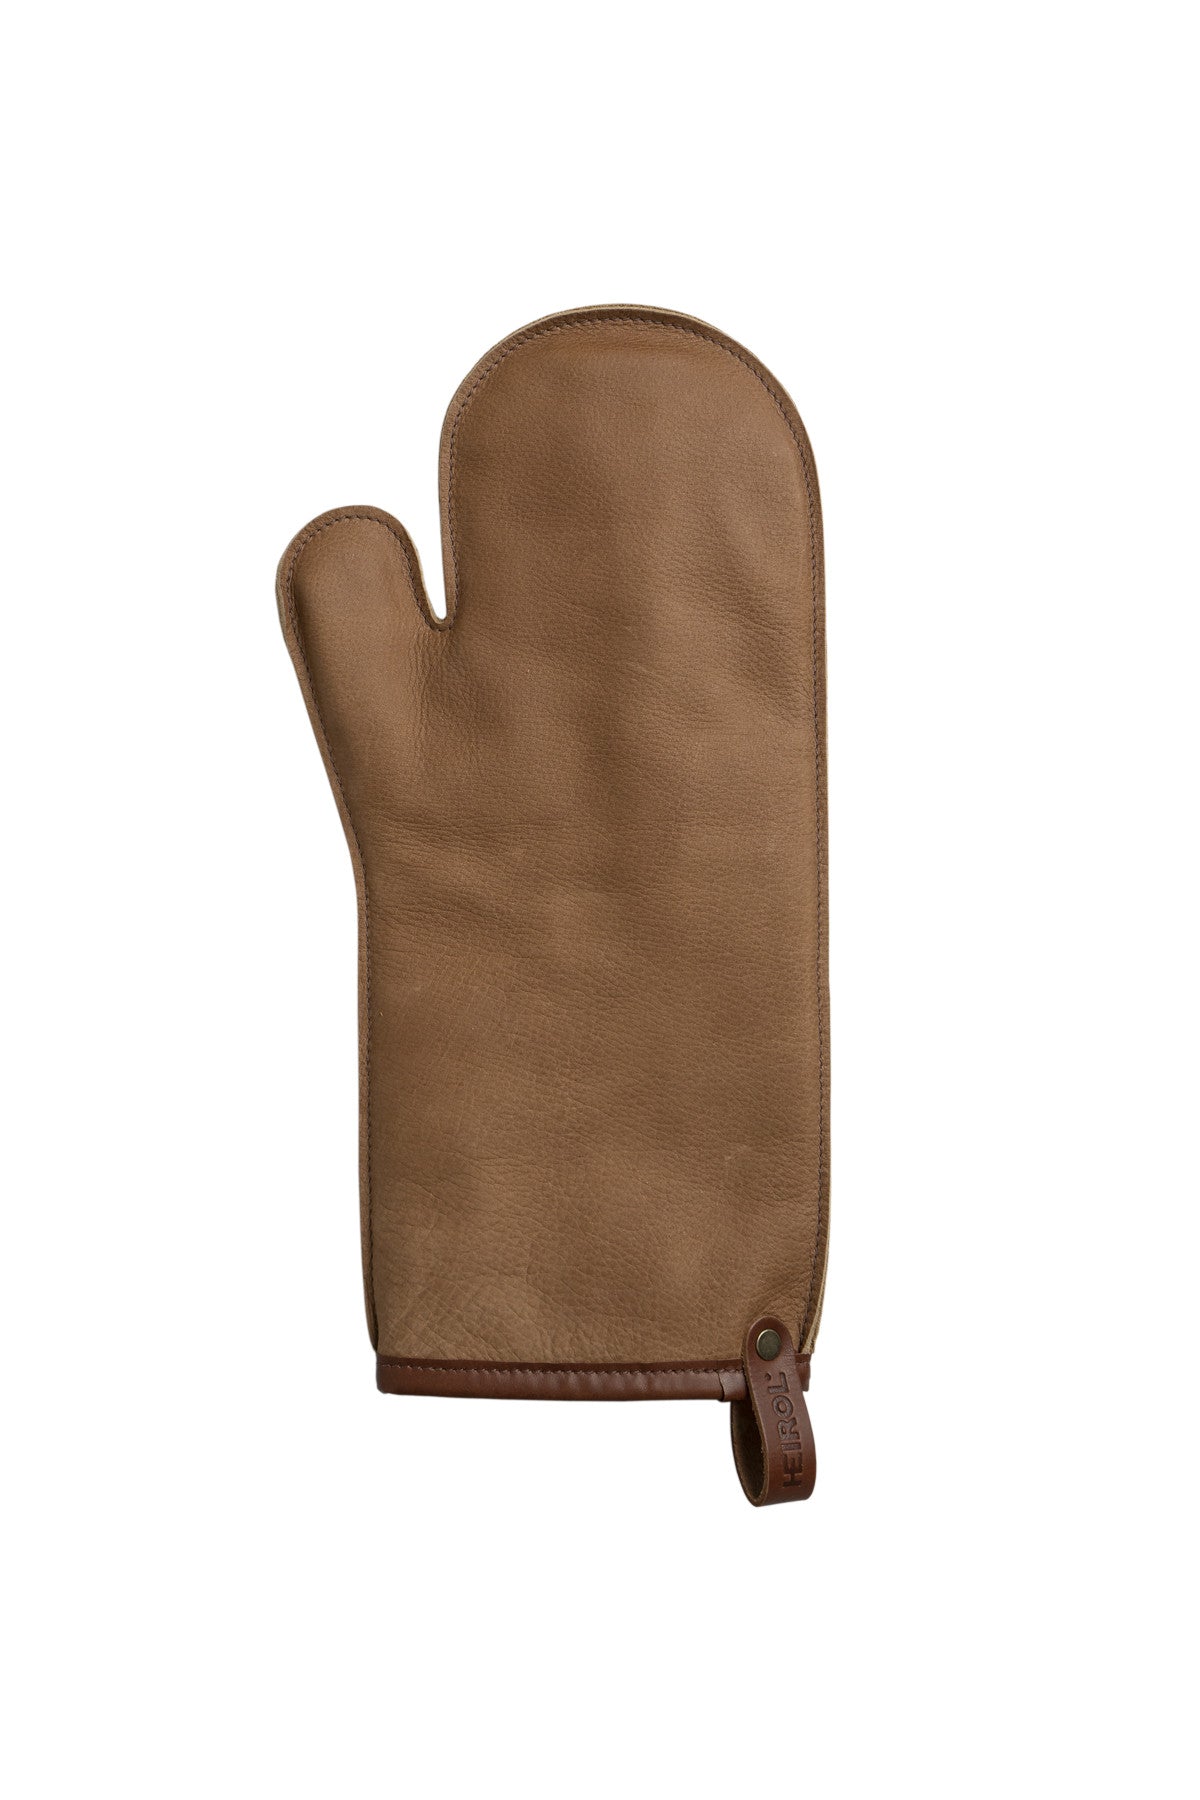 OVEN GLOVE LONG, leather brown